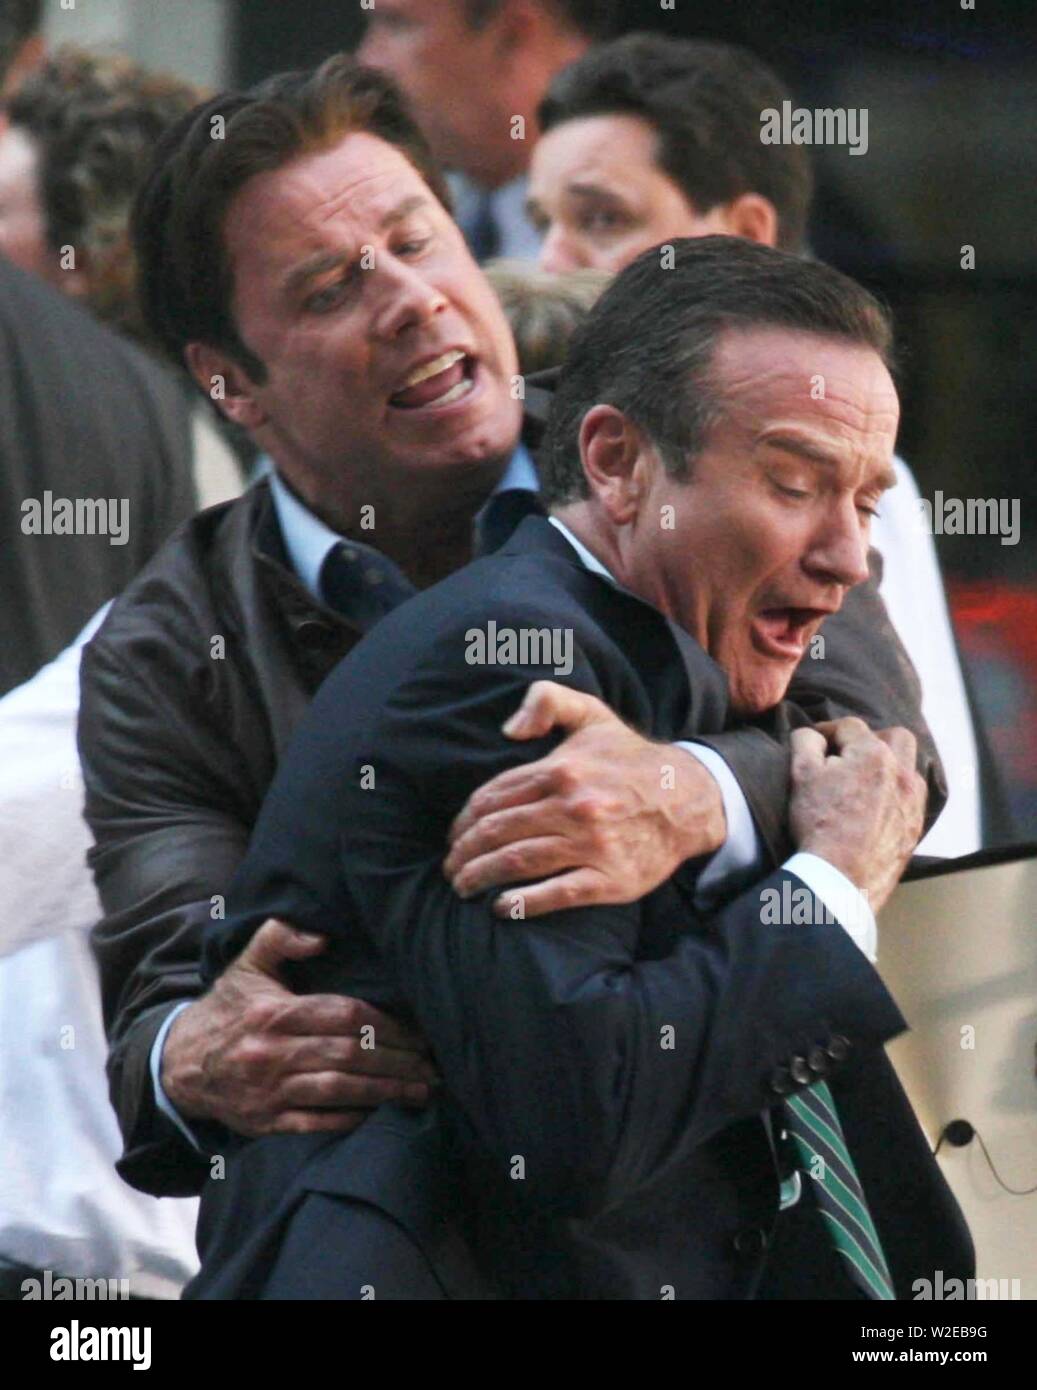 Travolta Williams1769.JPG New York, New York 07-31-07 John Travotta And Robin Williams  filming on the movie set of ''Old Dog'' Digital photo by ©Jack Jordan-PHOTOlink.net ONE TIME REPRODUCTION RIGHTS ONLY NO WEBSITE USE WITHOUT AGREEMENT Stock Photo